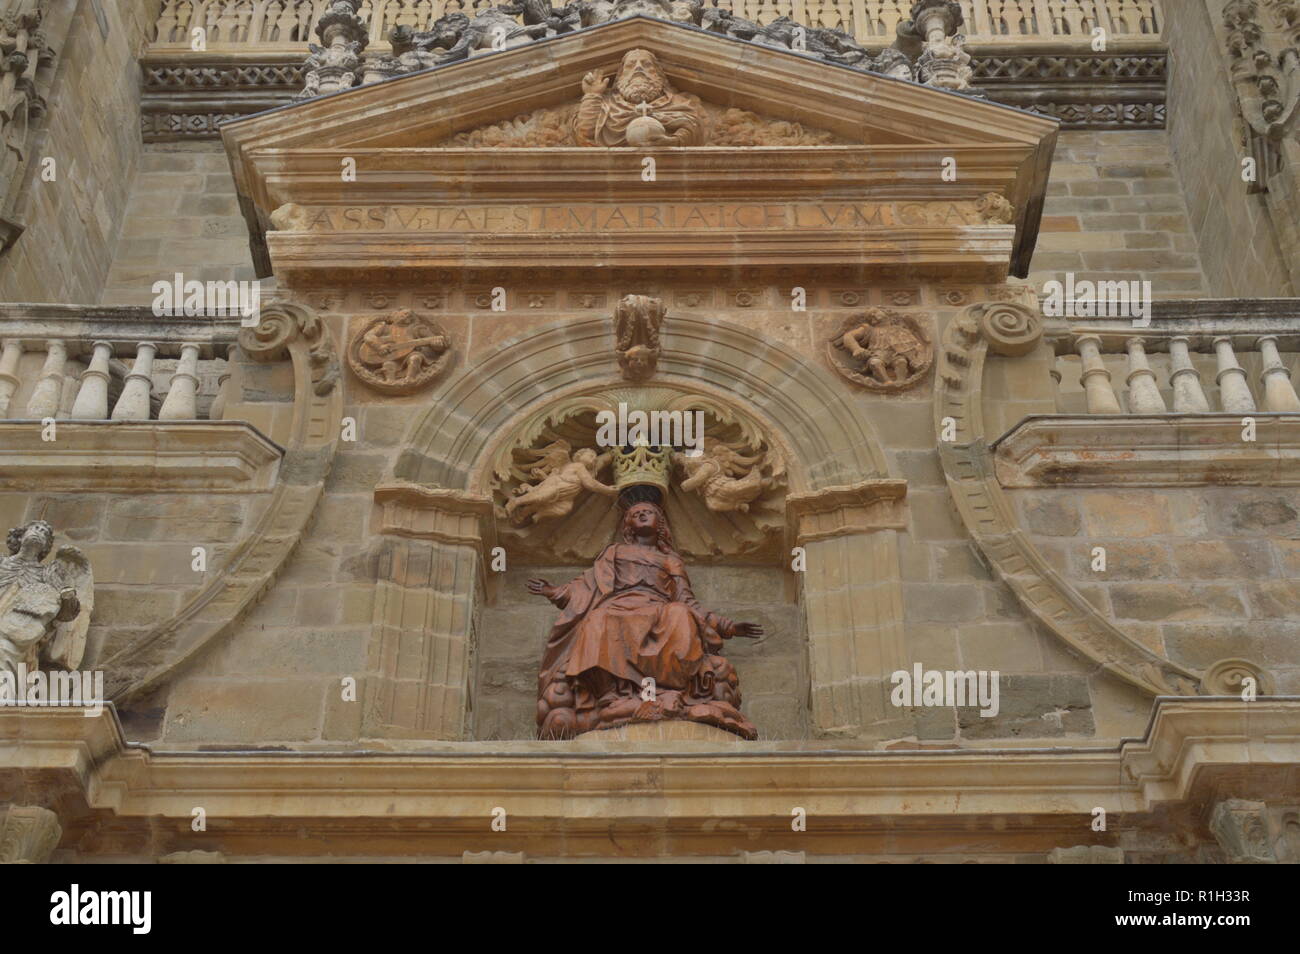 Carving Of The Virgin Mary On The Main Facade Of The Cathedral In Astorga. Architecture, History, Camino De Santiago, Travel, Street Photography. Nove Stock Photo